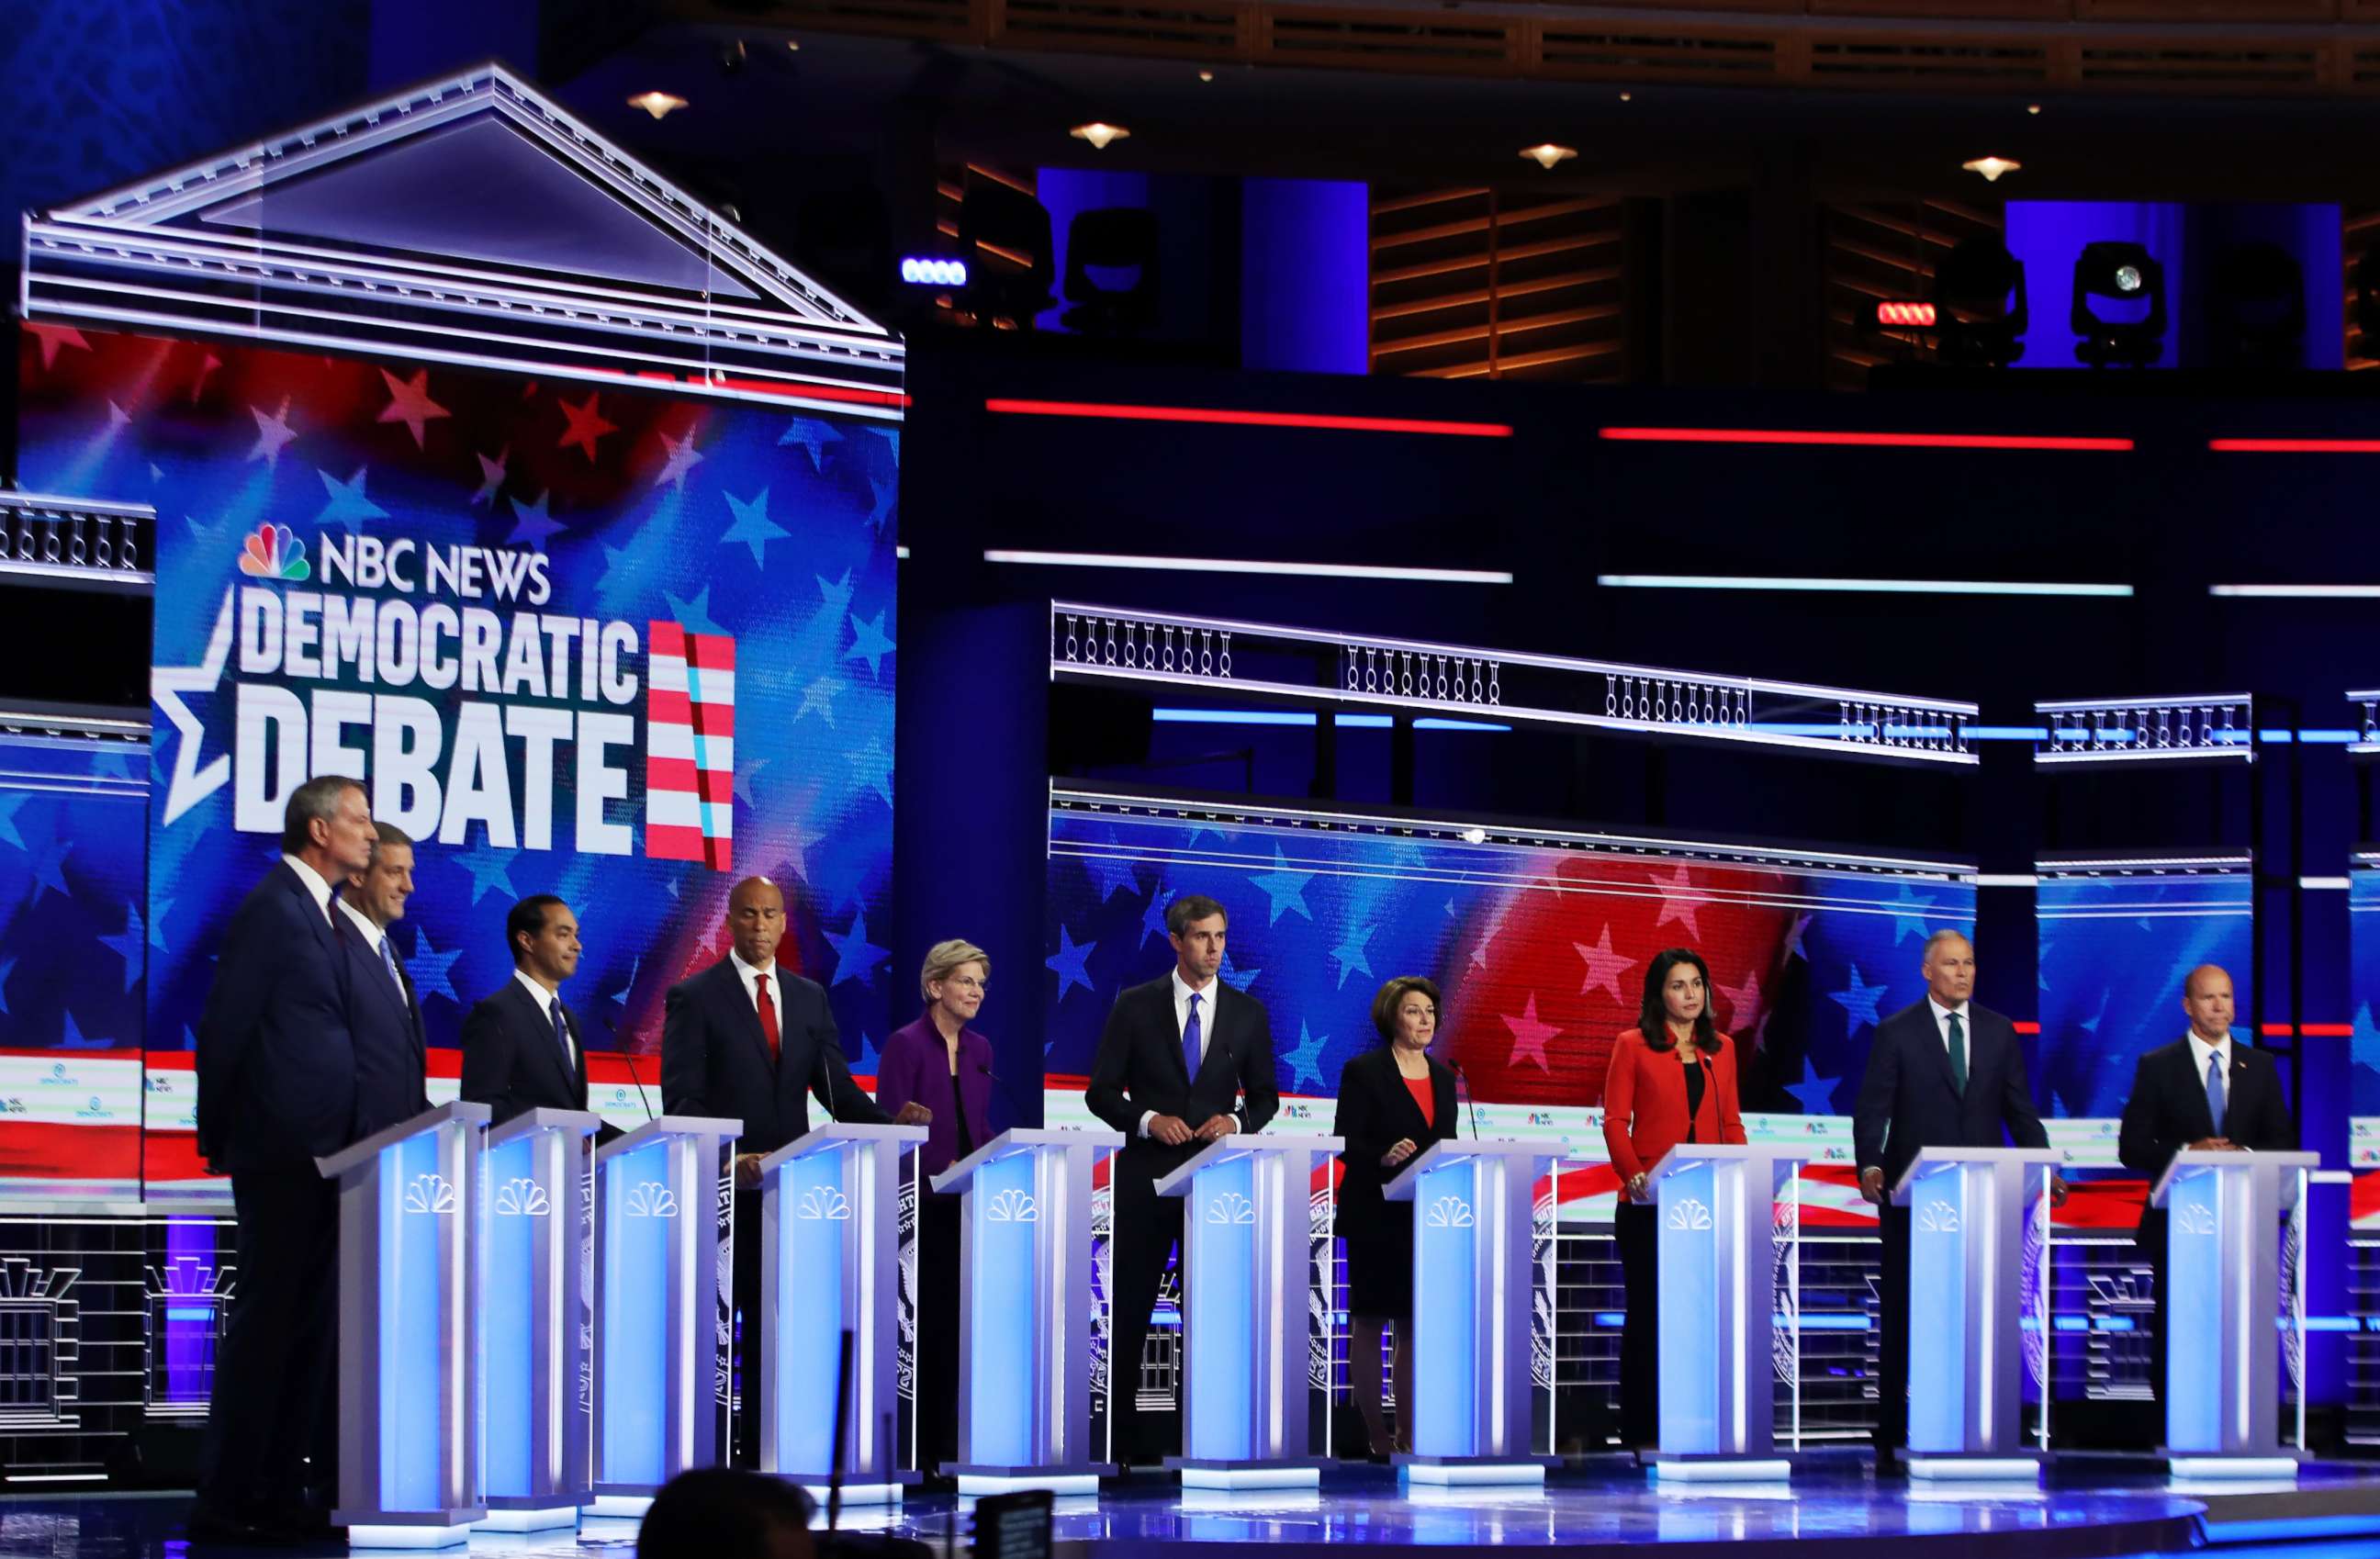 PHOTO: 2020 democratic presidential candidates participate in the first Democratic primary debate hosted by NBC News at the Adrienne Arsht Center for the Performing Arts in Miami, Florida, June 26, 2019.